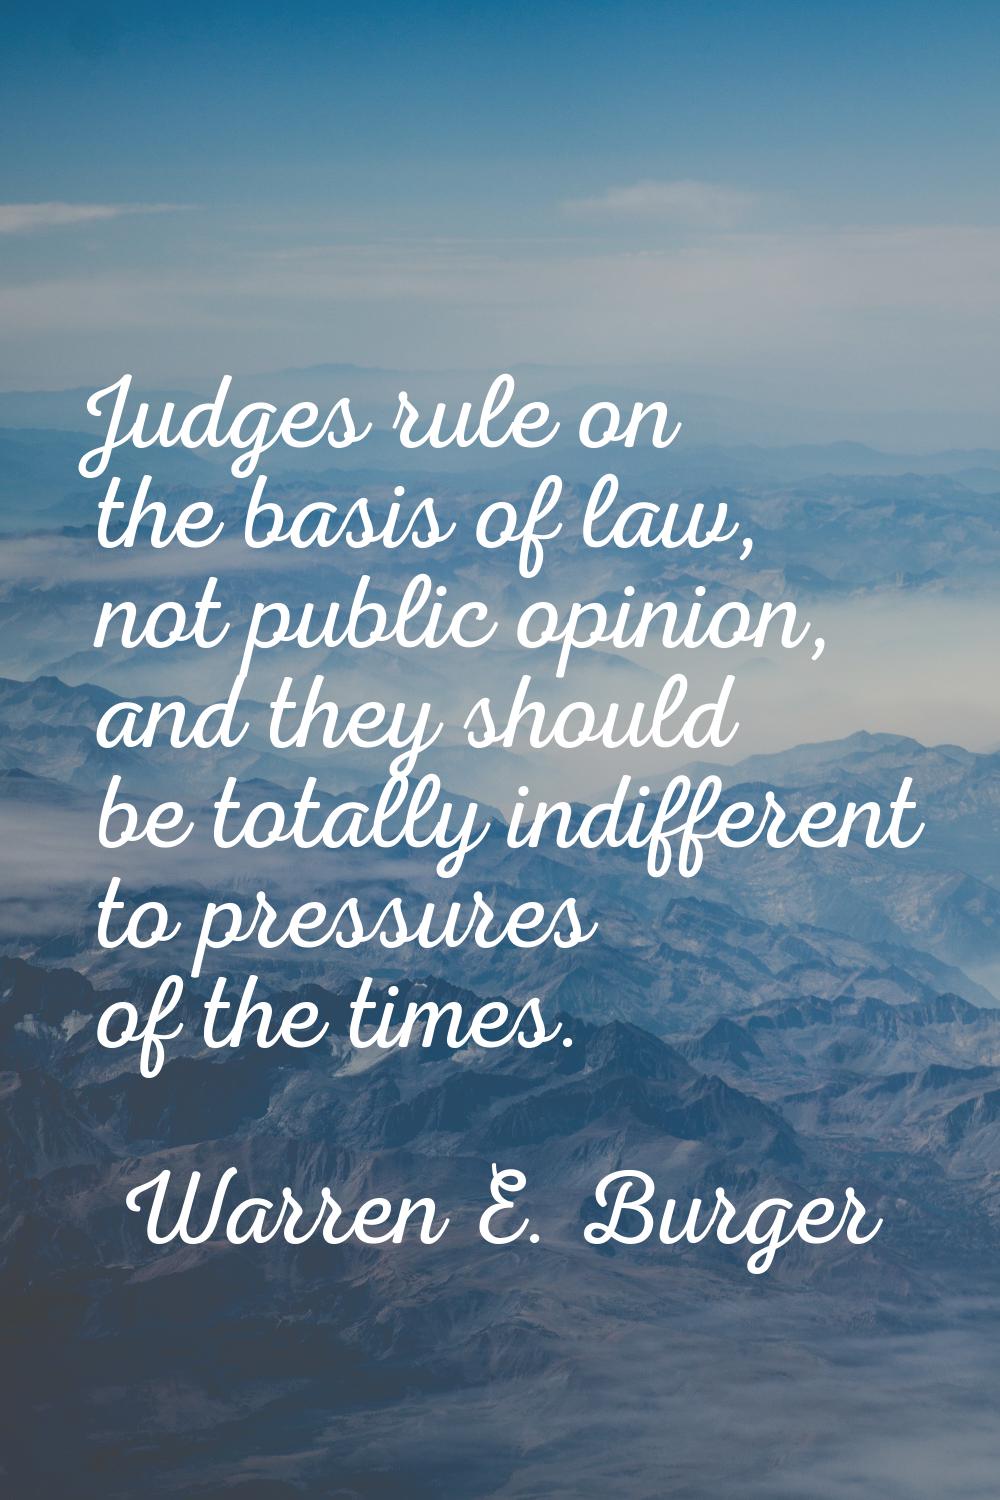 Judges rule on the basis of law, not public opinion, and they should be totally indifferent to pres